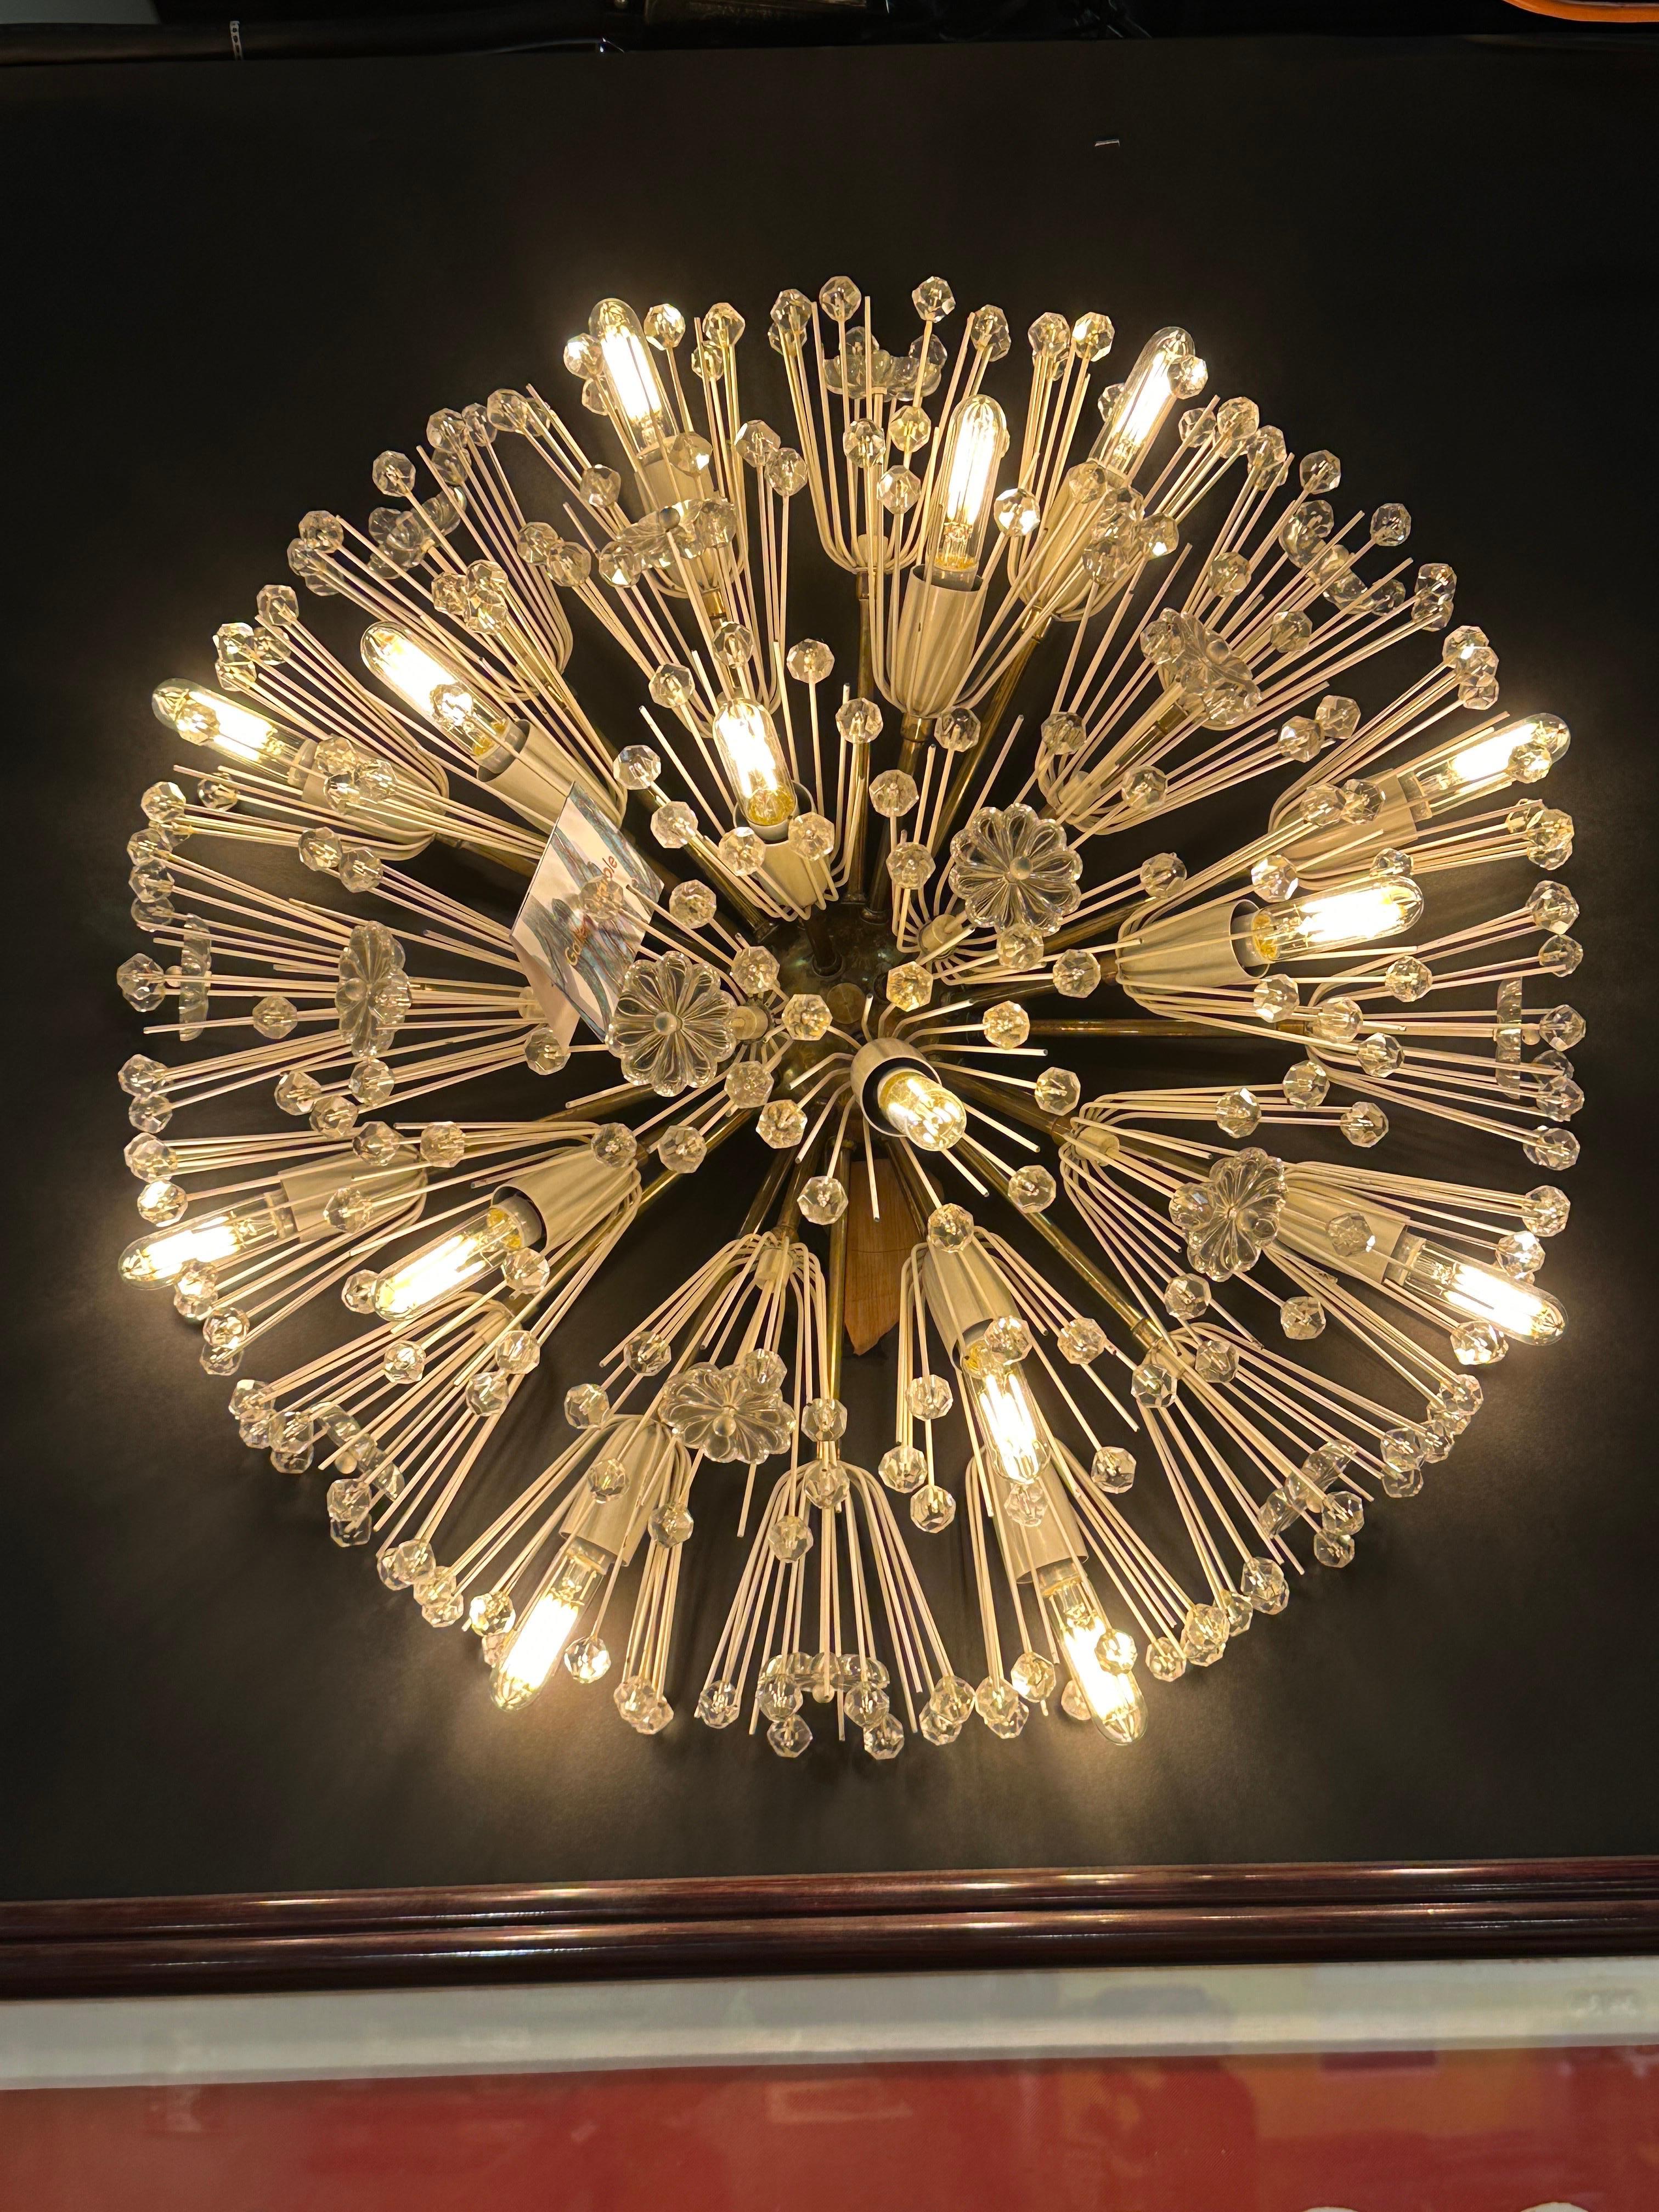 Emil Stejnar snowflake flush mount made in 1960’s
Rewired for United States
It requires 15 candelabra bulbs 25 or 40 watt and can be connected to dimmer to create dramatic lighting.
It needs to be hard wired by a professional electrician.